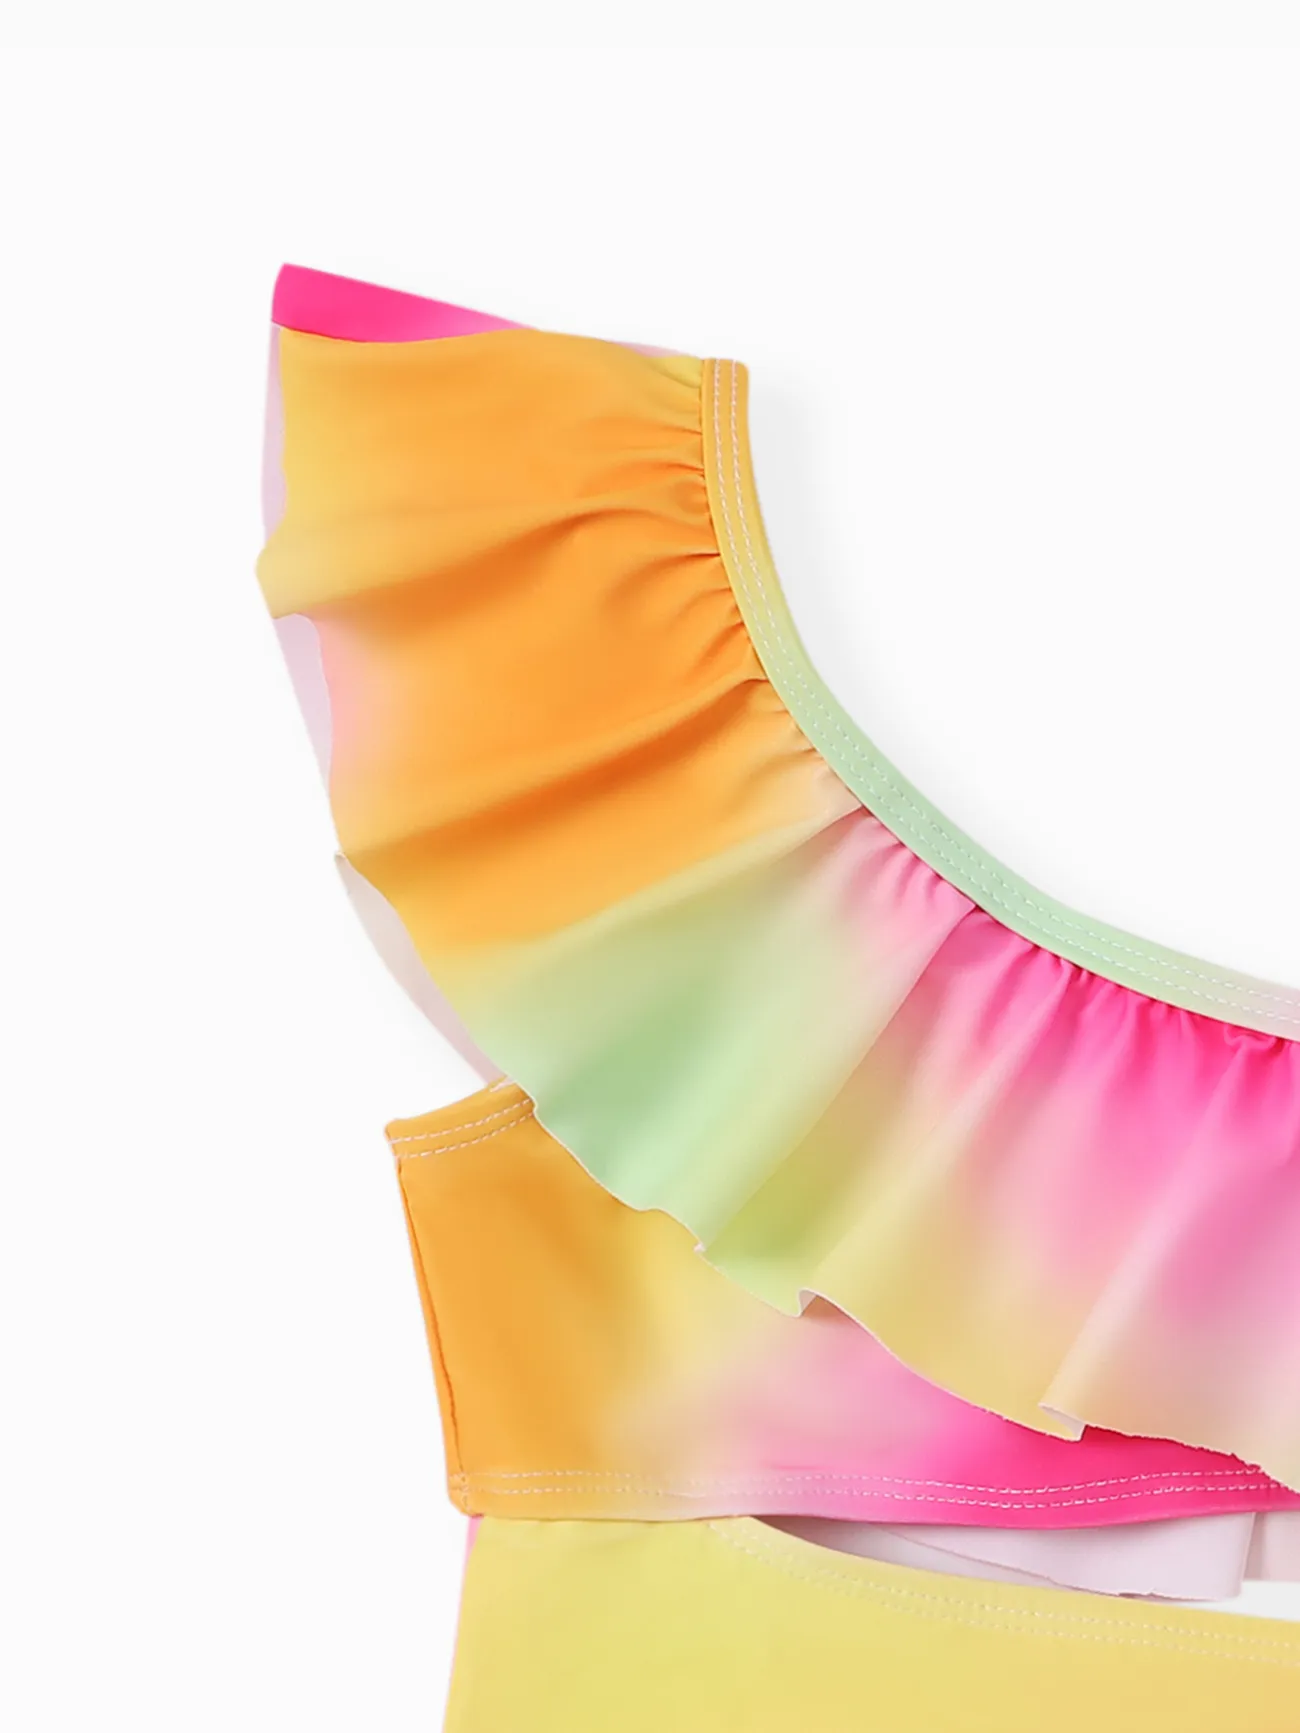 Sweet Girl Ruffle Edge Swimsuit, Polyester Spandex, 1 Piece Multi-color big image 1